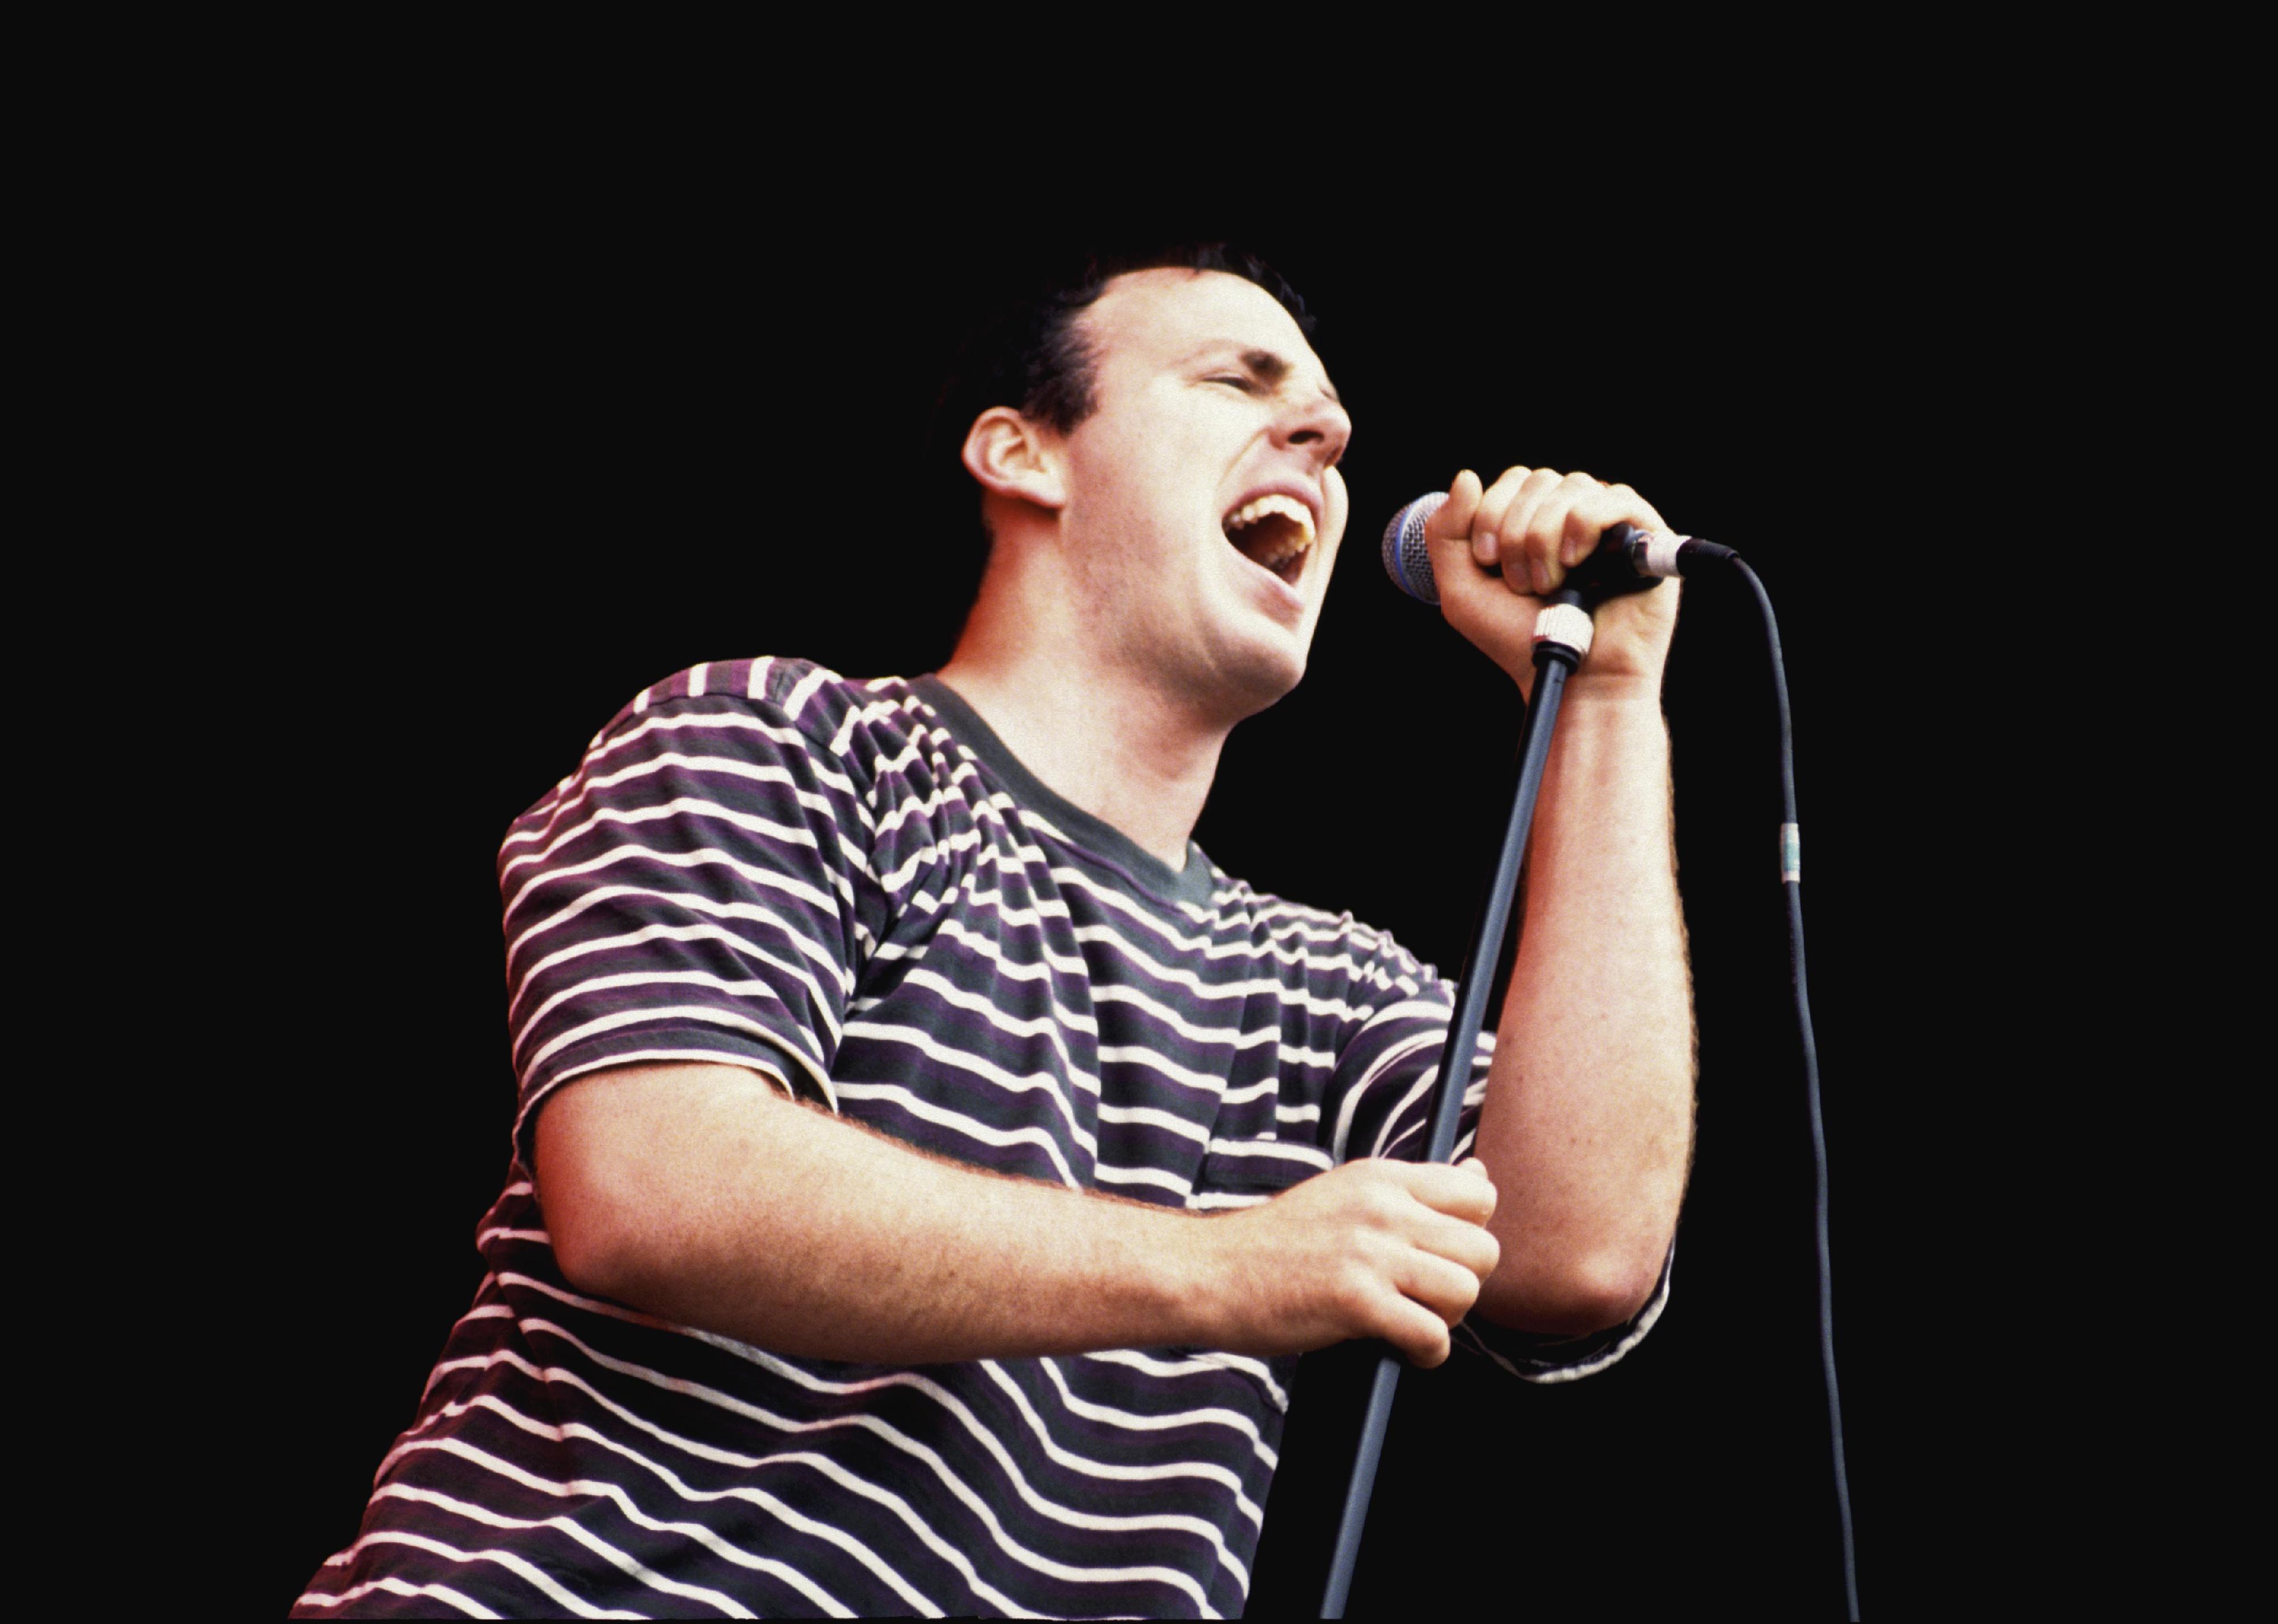 Greg Graffin performing on stage.